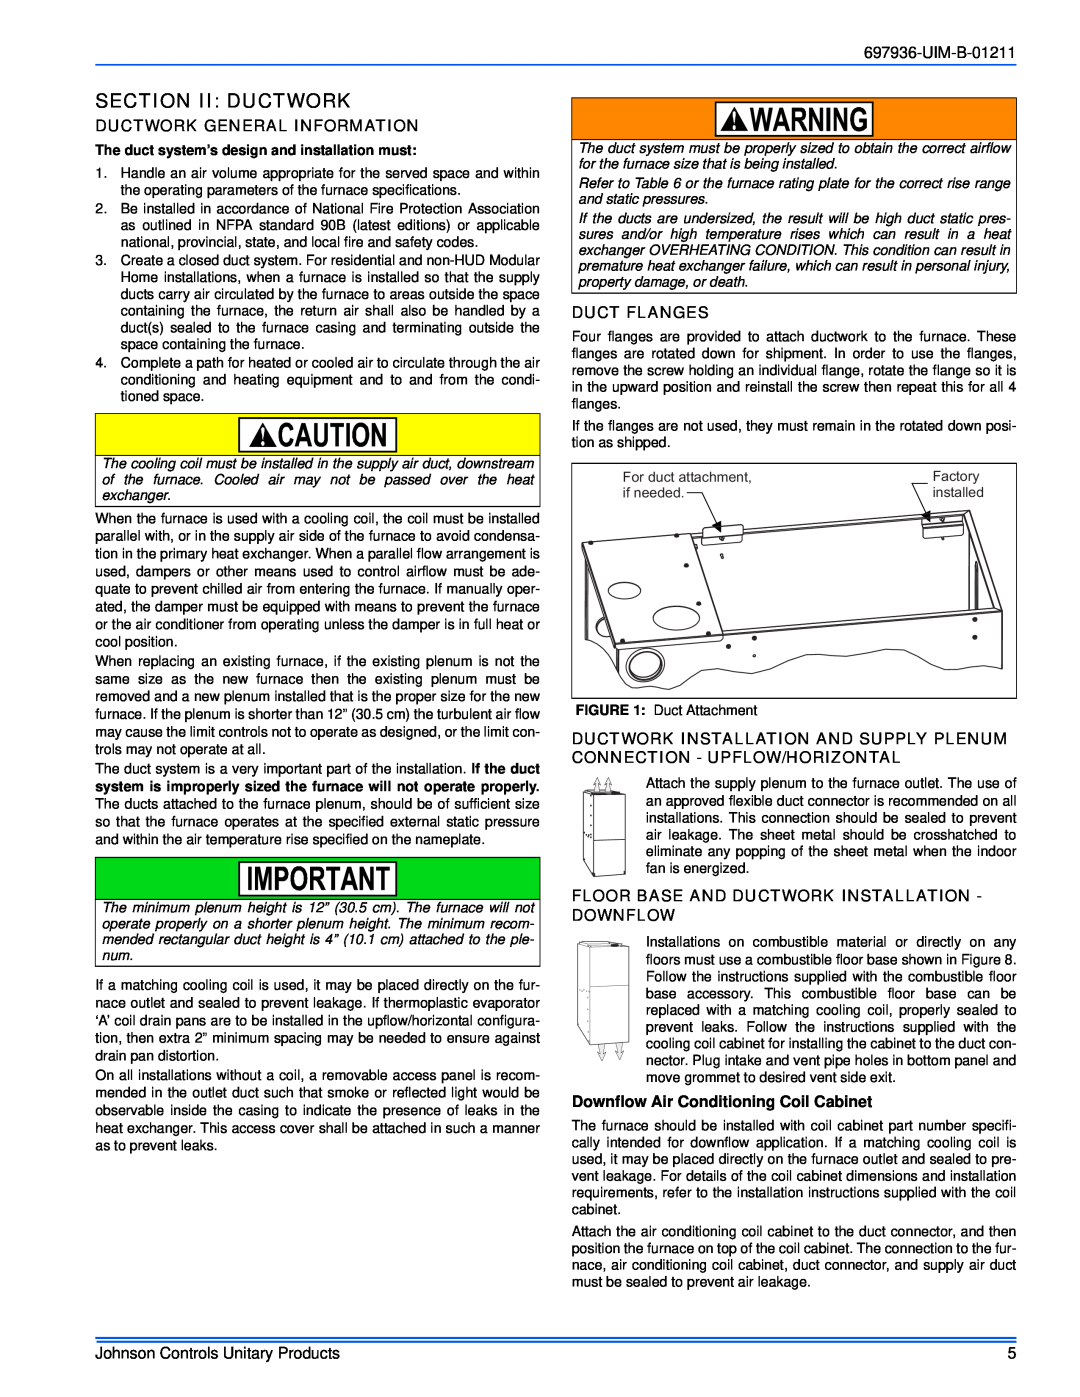 Johnson Controls TM9X*MP installation manual Section Ii Ductwork, UIM-B-01211, Ductwork General Information, Duct Flanges 